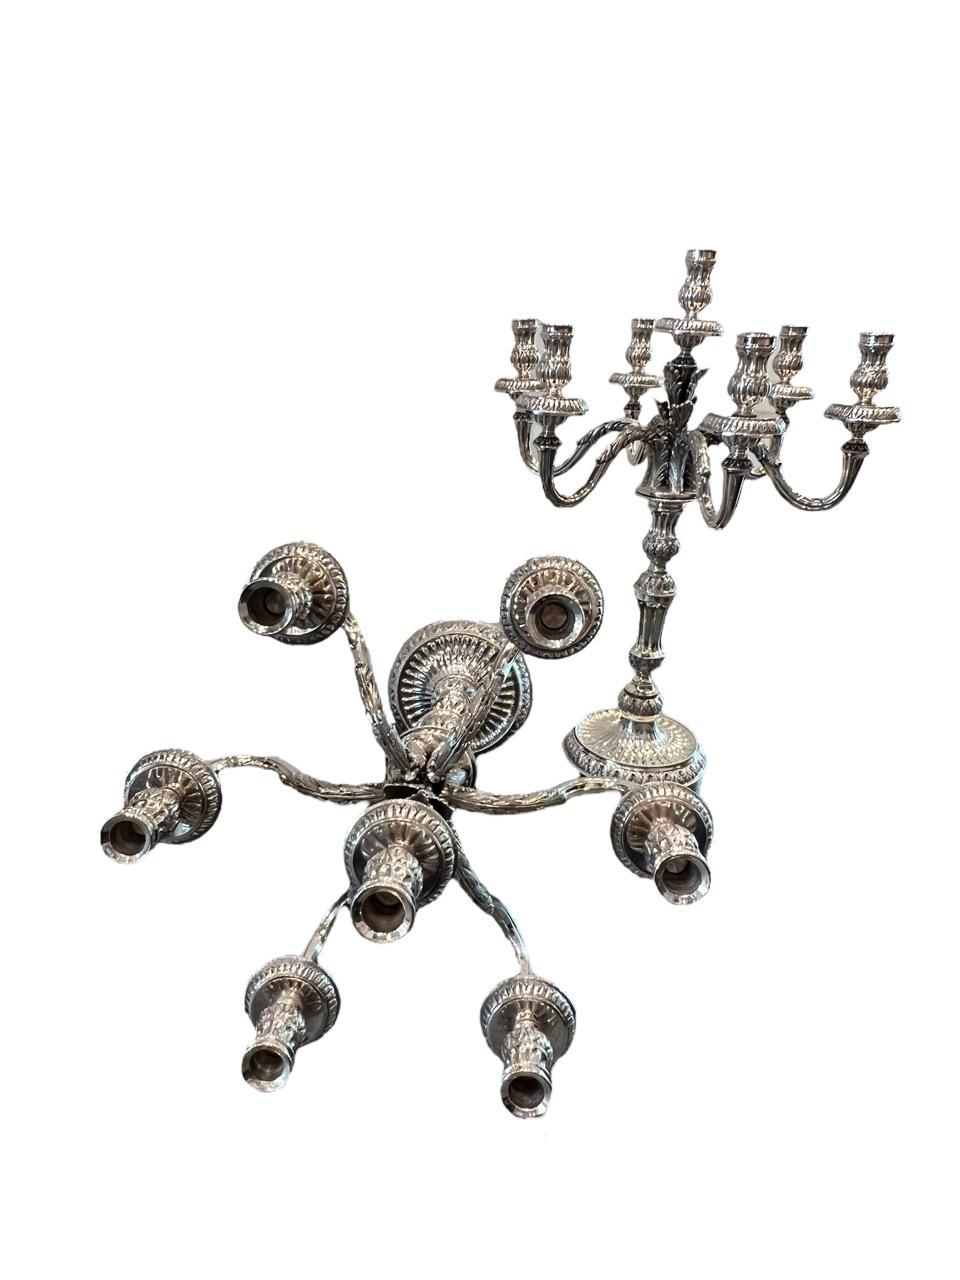 1910 Italian Pair of Sterling Silver Candelabras, Tall and Heavy For Sale 1